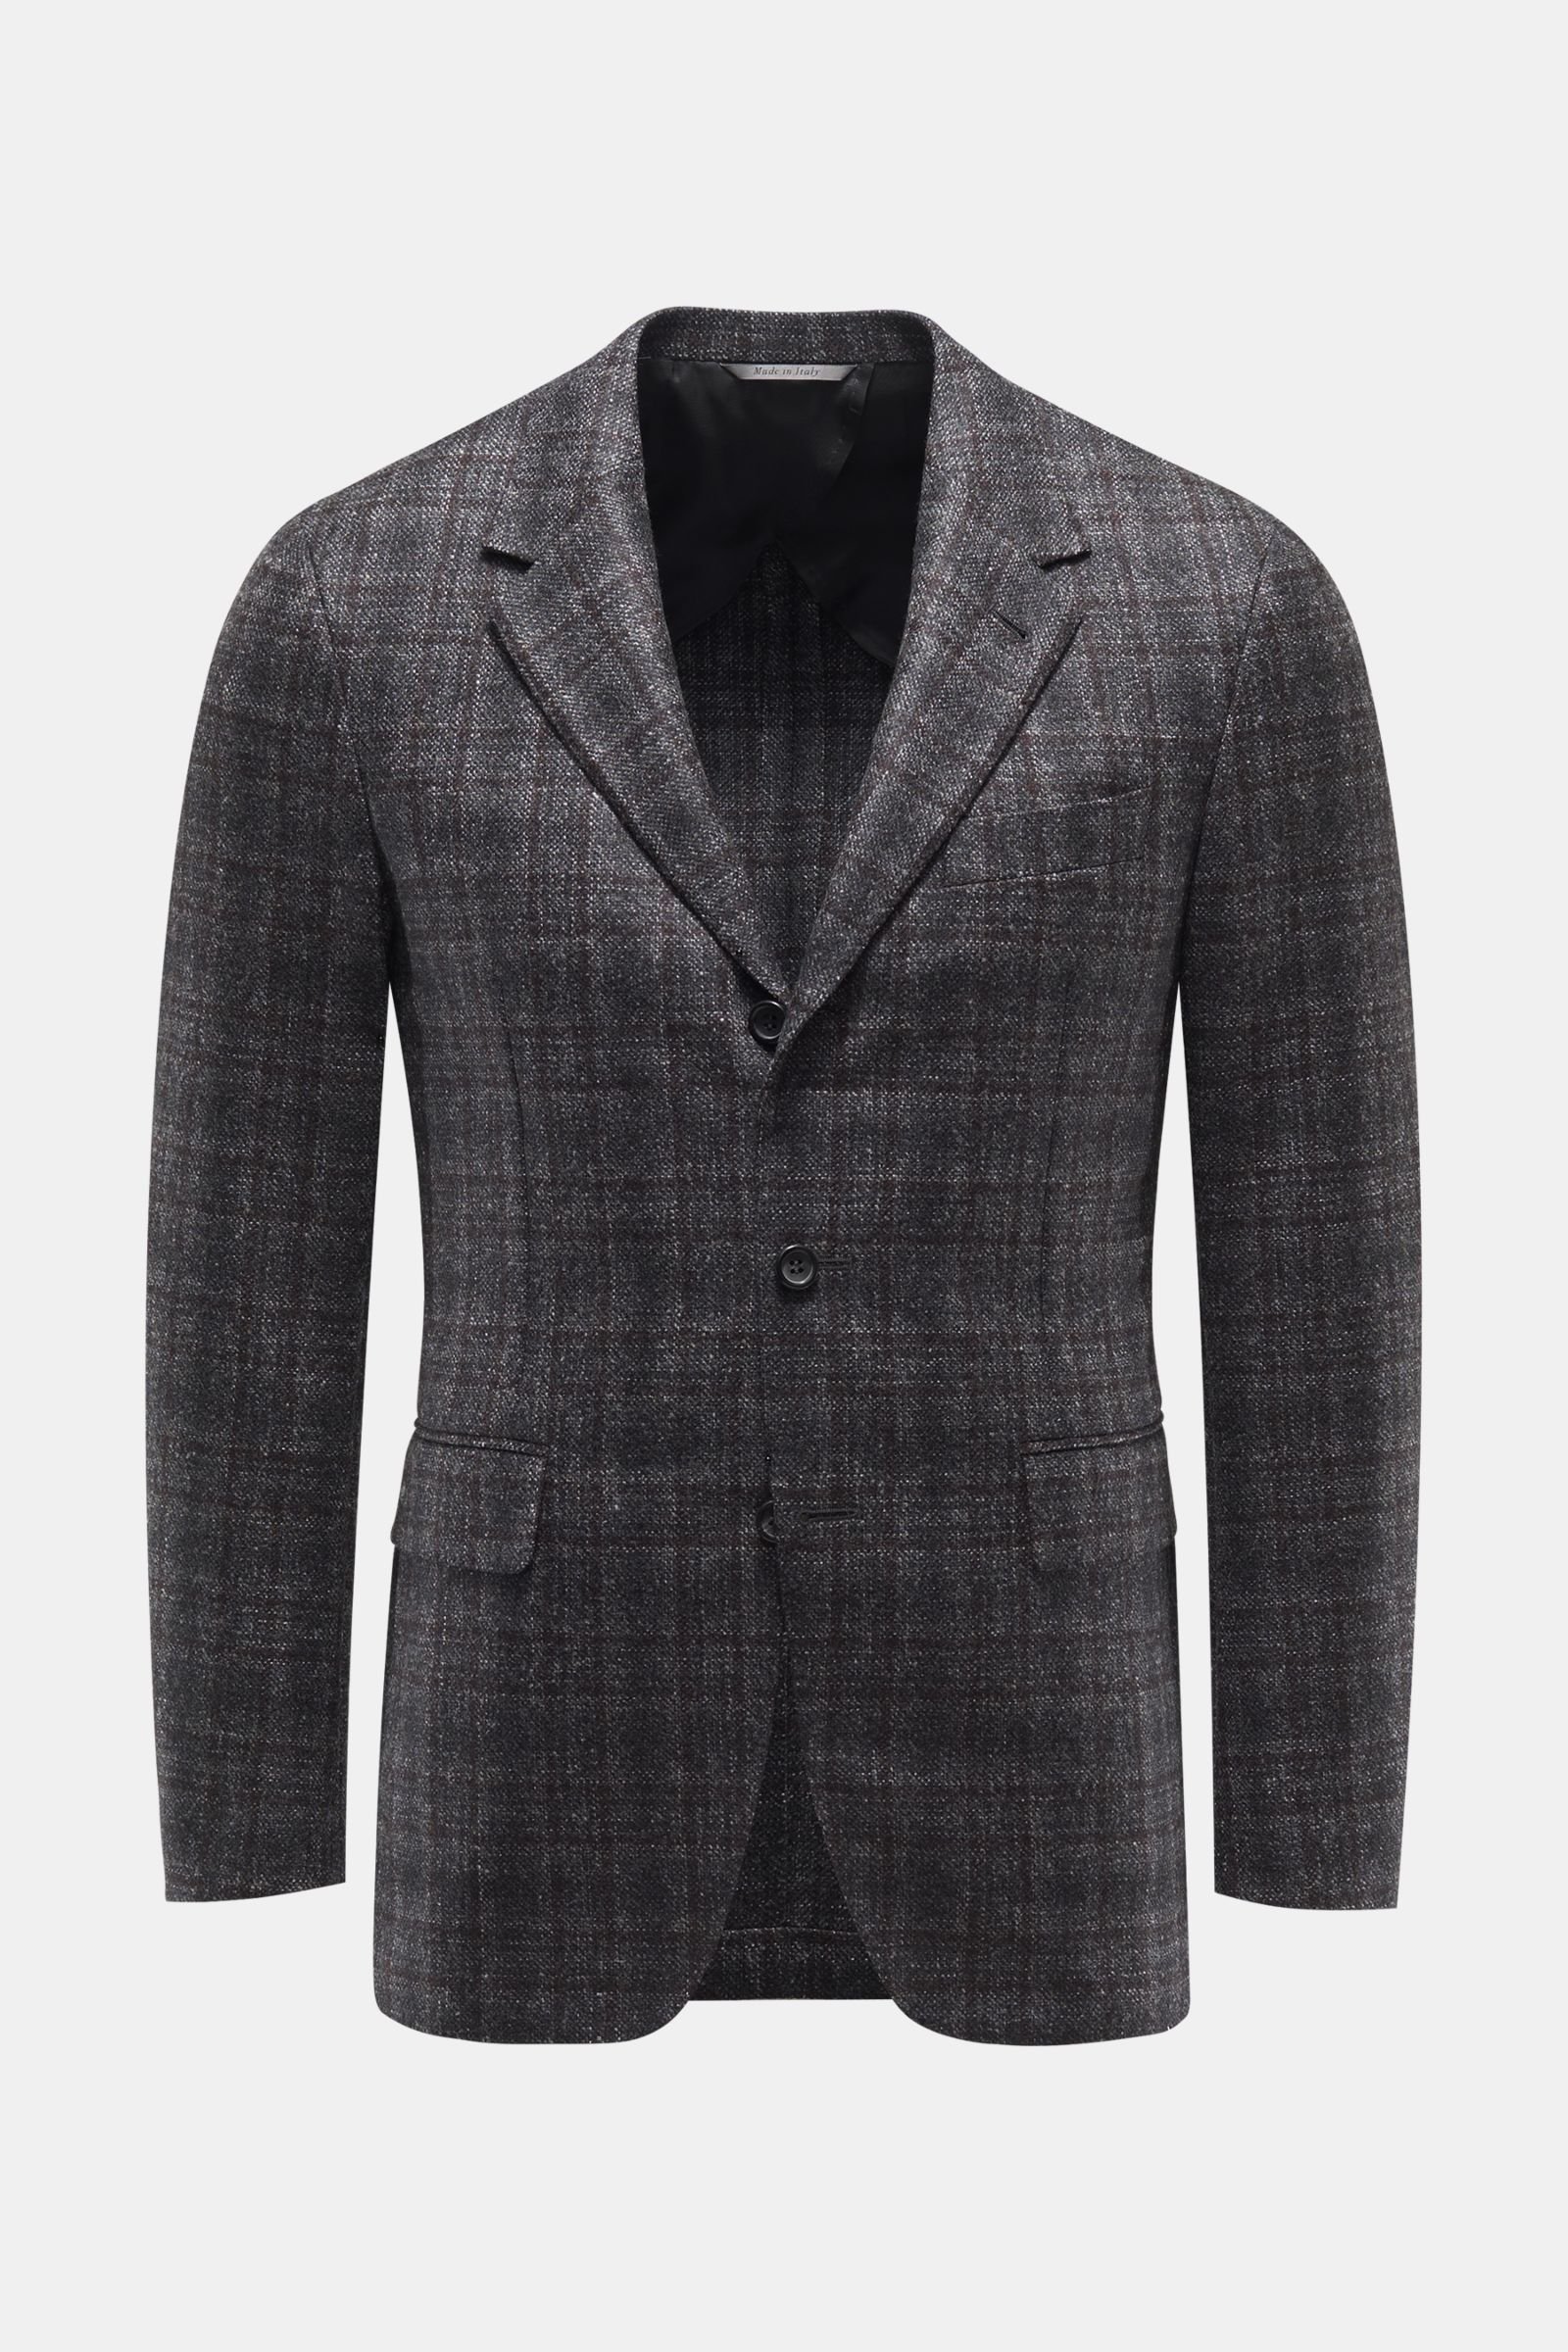 Smart-casual jacket anthracite/burgundy checked